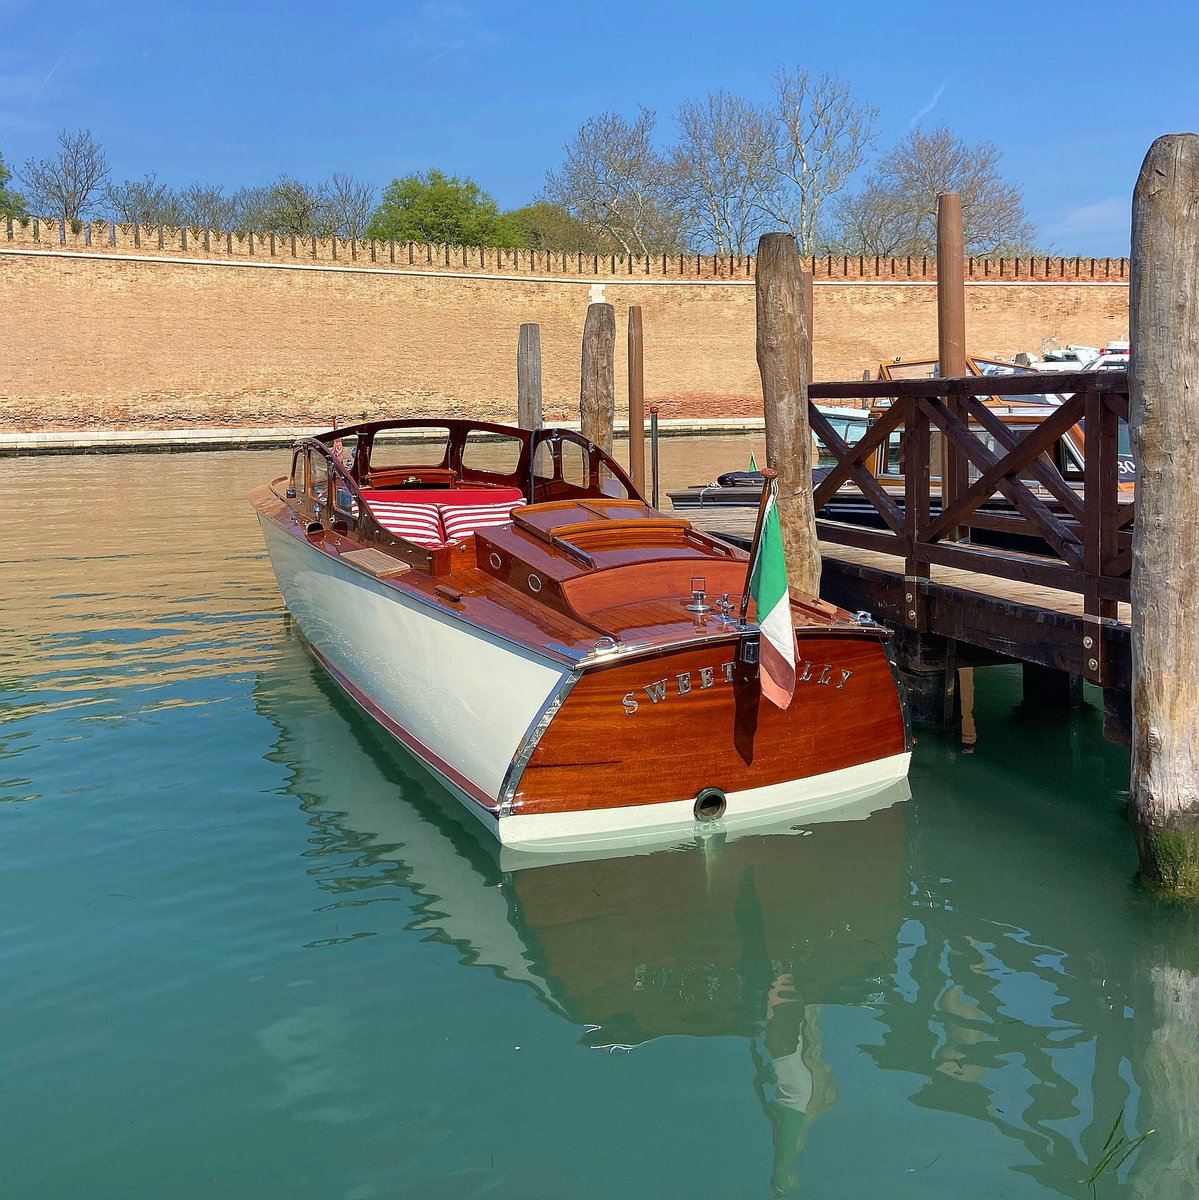 Our beautiful 'Sweet Molly' from 1938 getting ready to take our wonderful guests on a tour of the lagoon.
#classicboatsvenice #Venedig #classicboats #Venise #travel #luxury #Venezia #Venice #sweetmolly